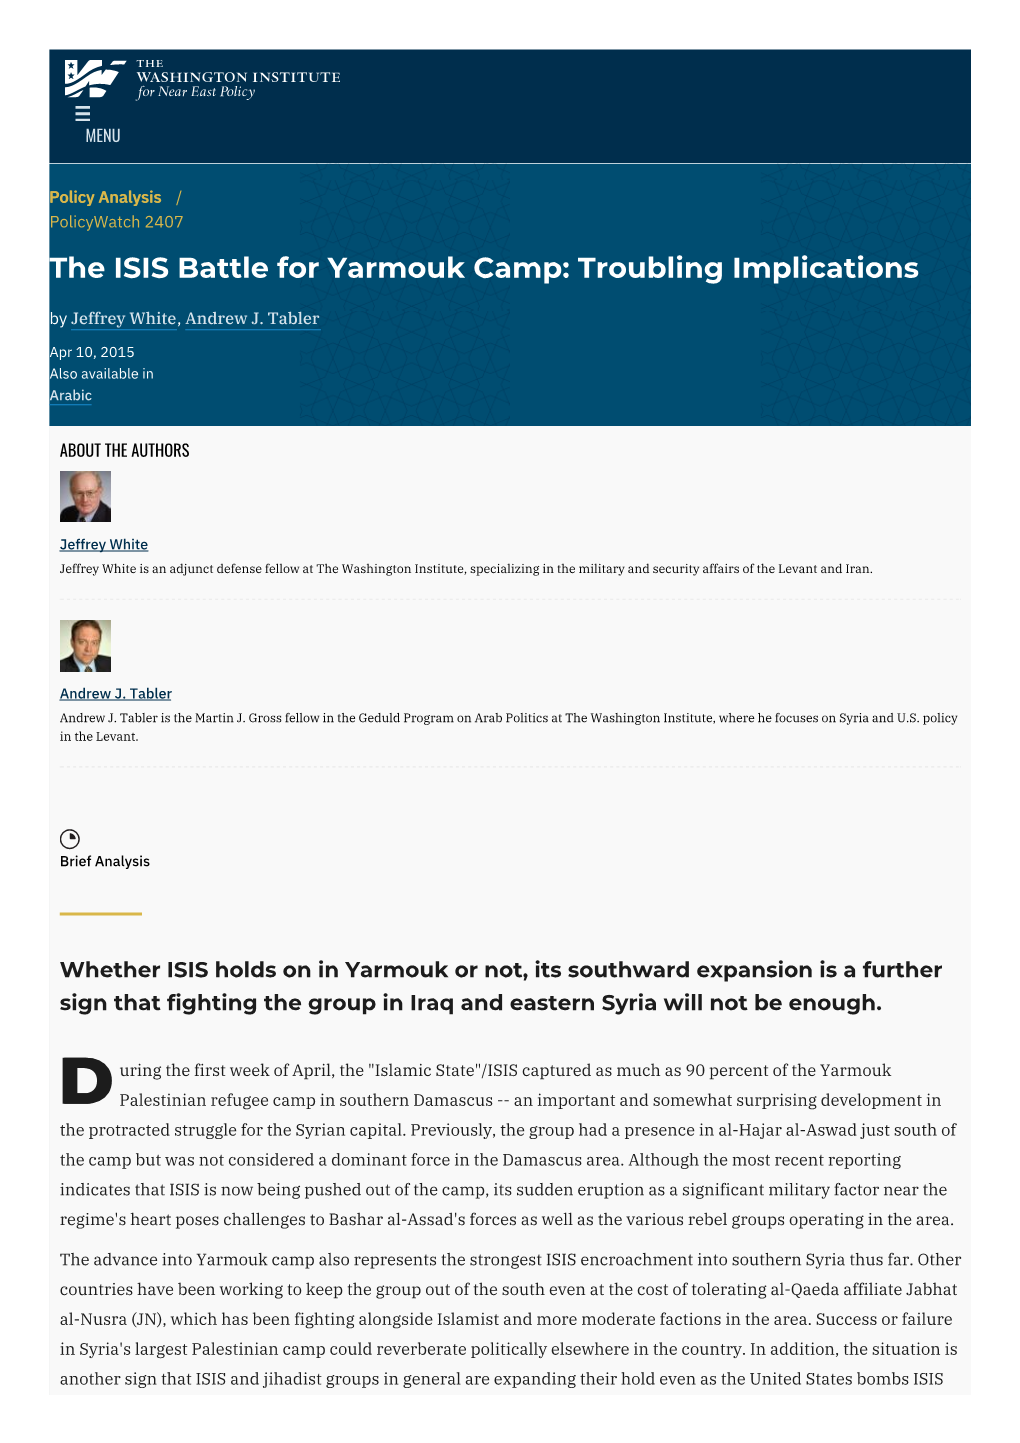 The ISIS Battle for Yarmouk Camp: Troubling Implications by Jeffrey White, Andrew J